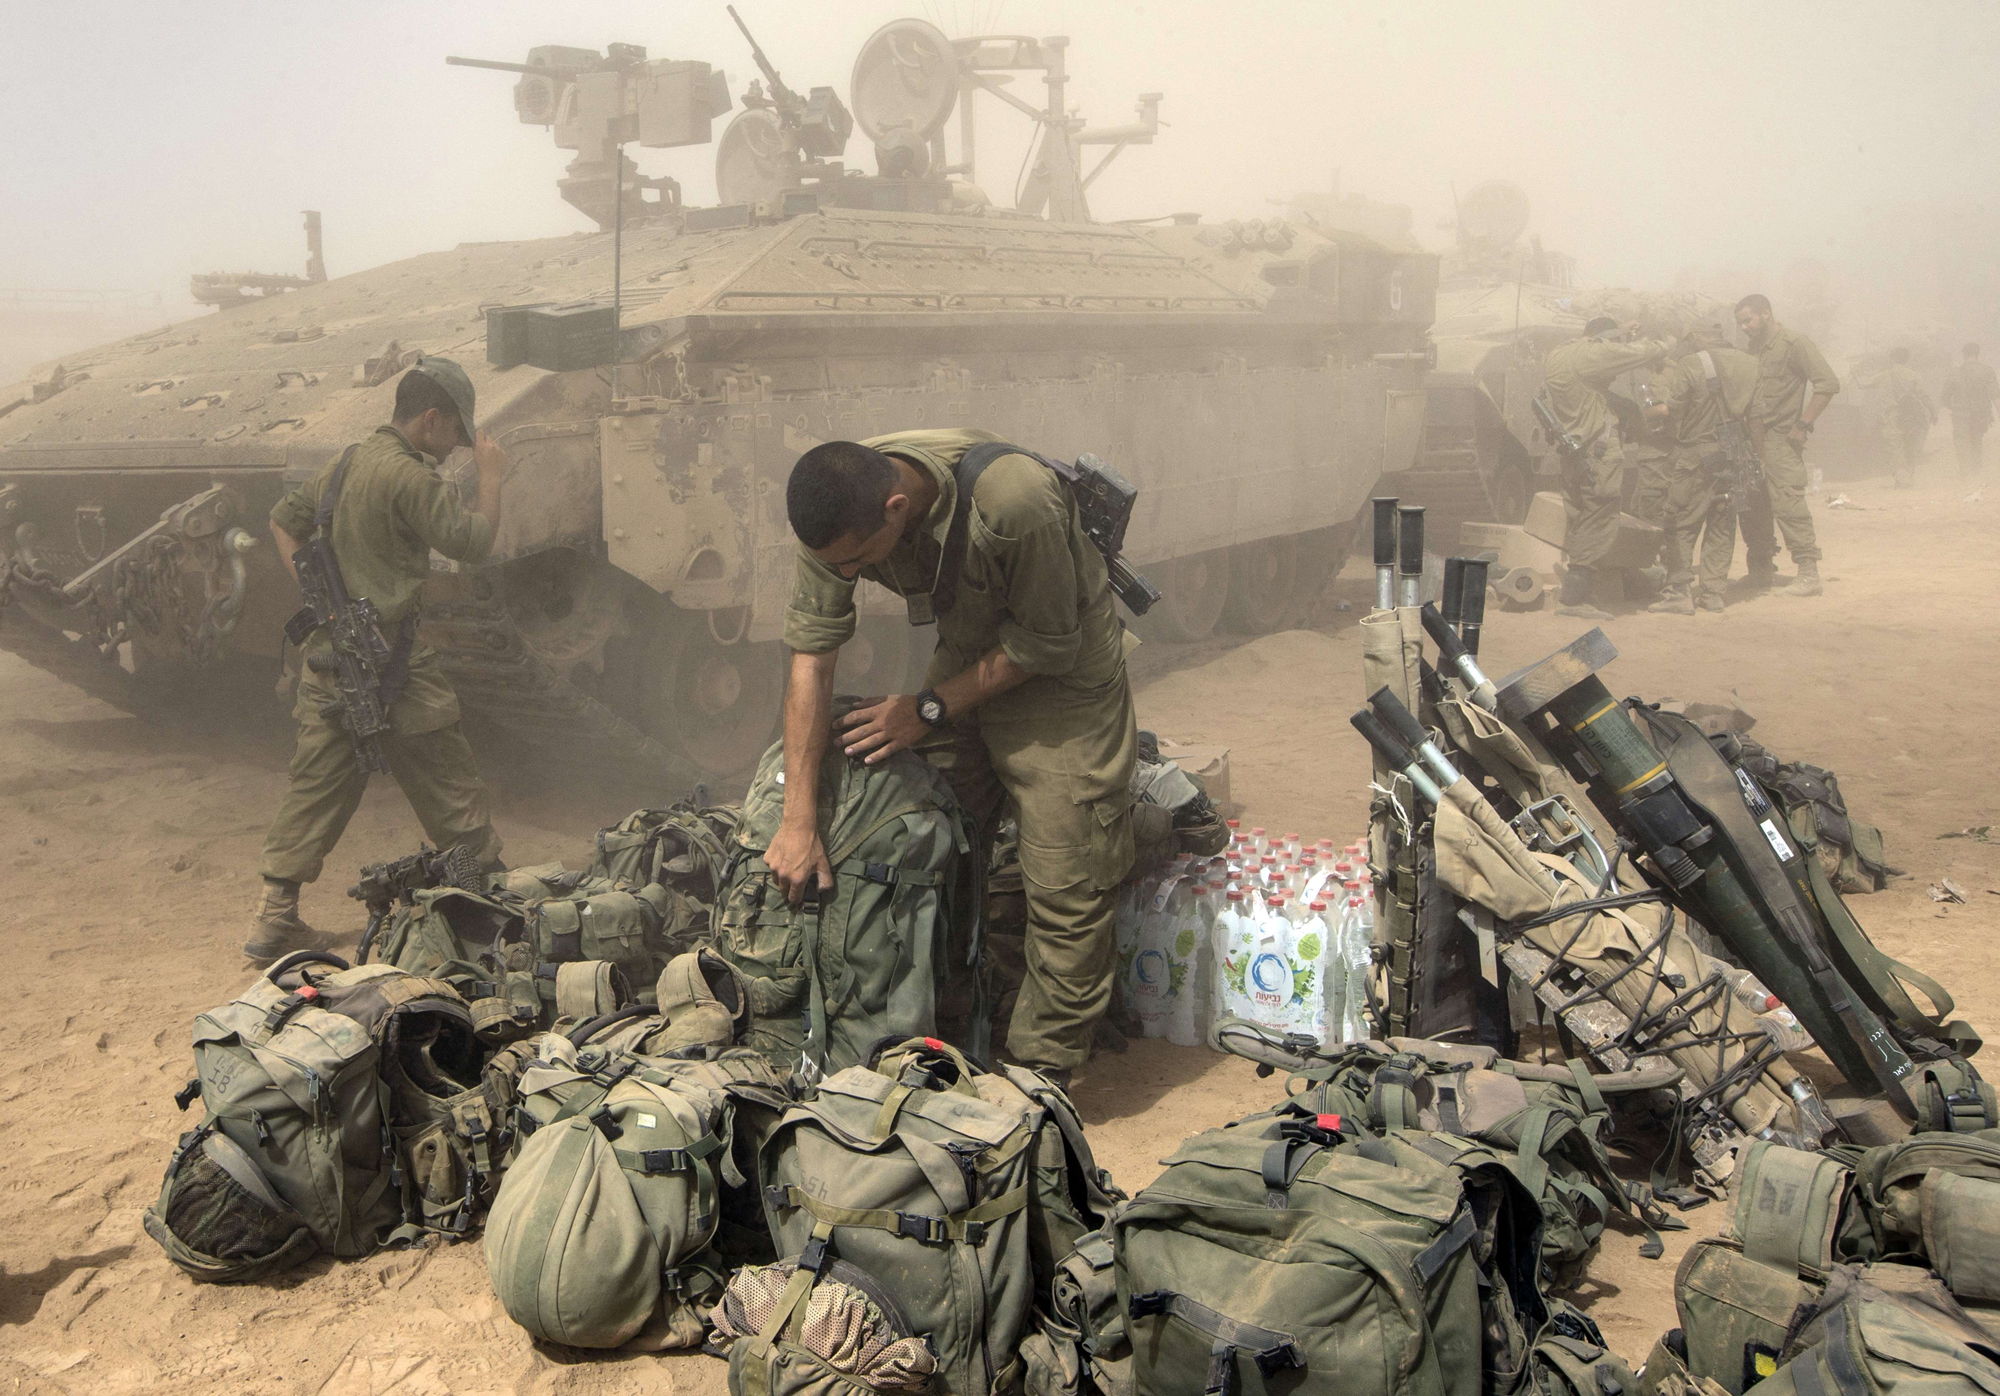 An Israeli soldier prepares his equipment at an army deployment area, on the southern Israeli border with the Gaza Strip, on August 1, 2014. (Jack Guez—AFP/Getty Images)